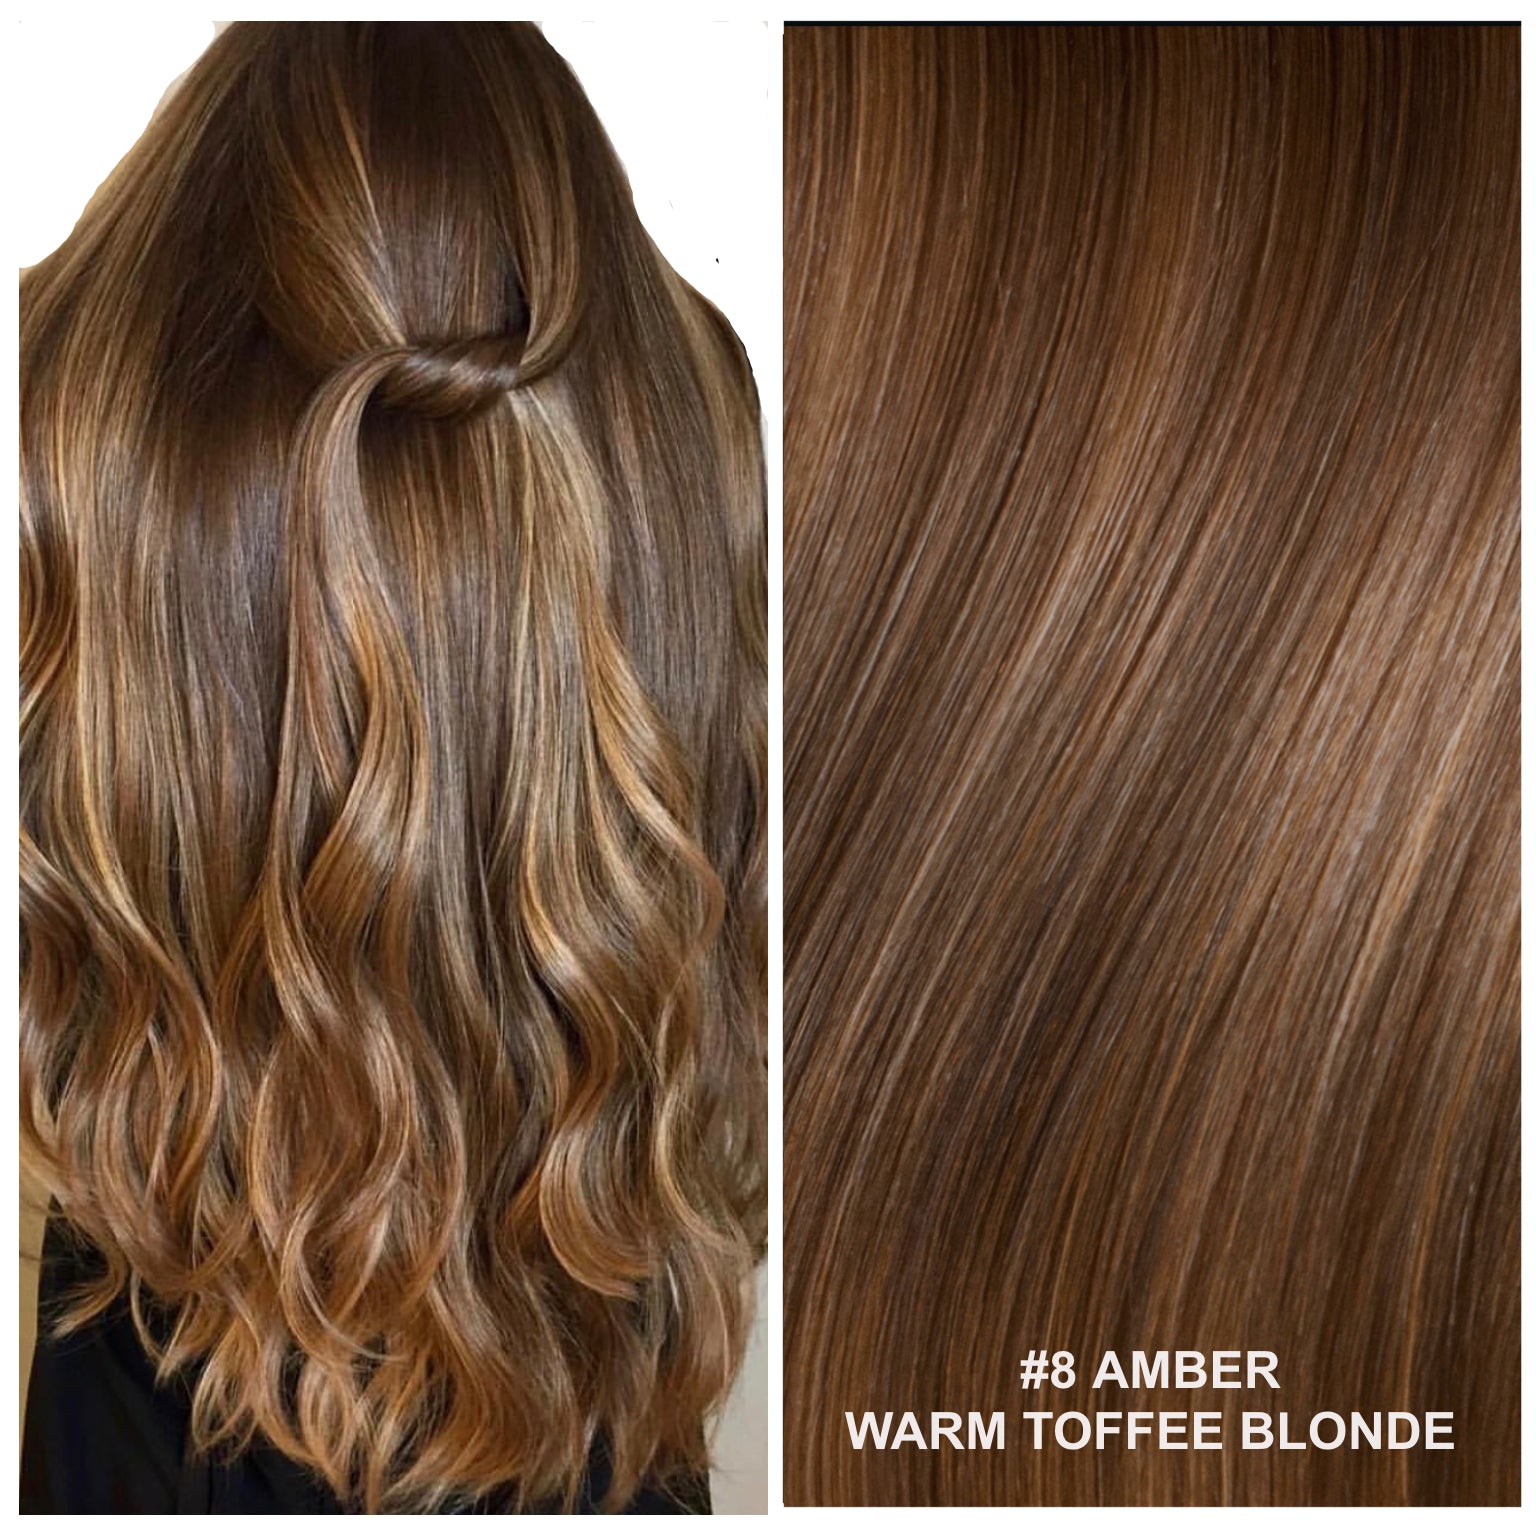 RUSSIAN TAPE HAIR EXTENSIONS #8 - AMBER - WARM TOFFEE BLONDE